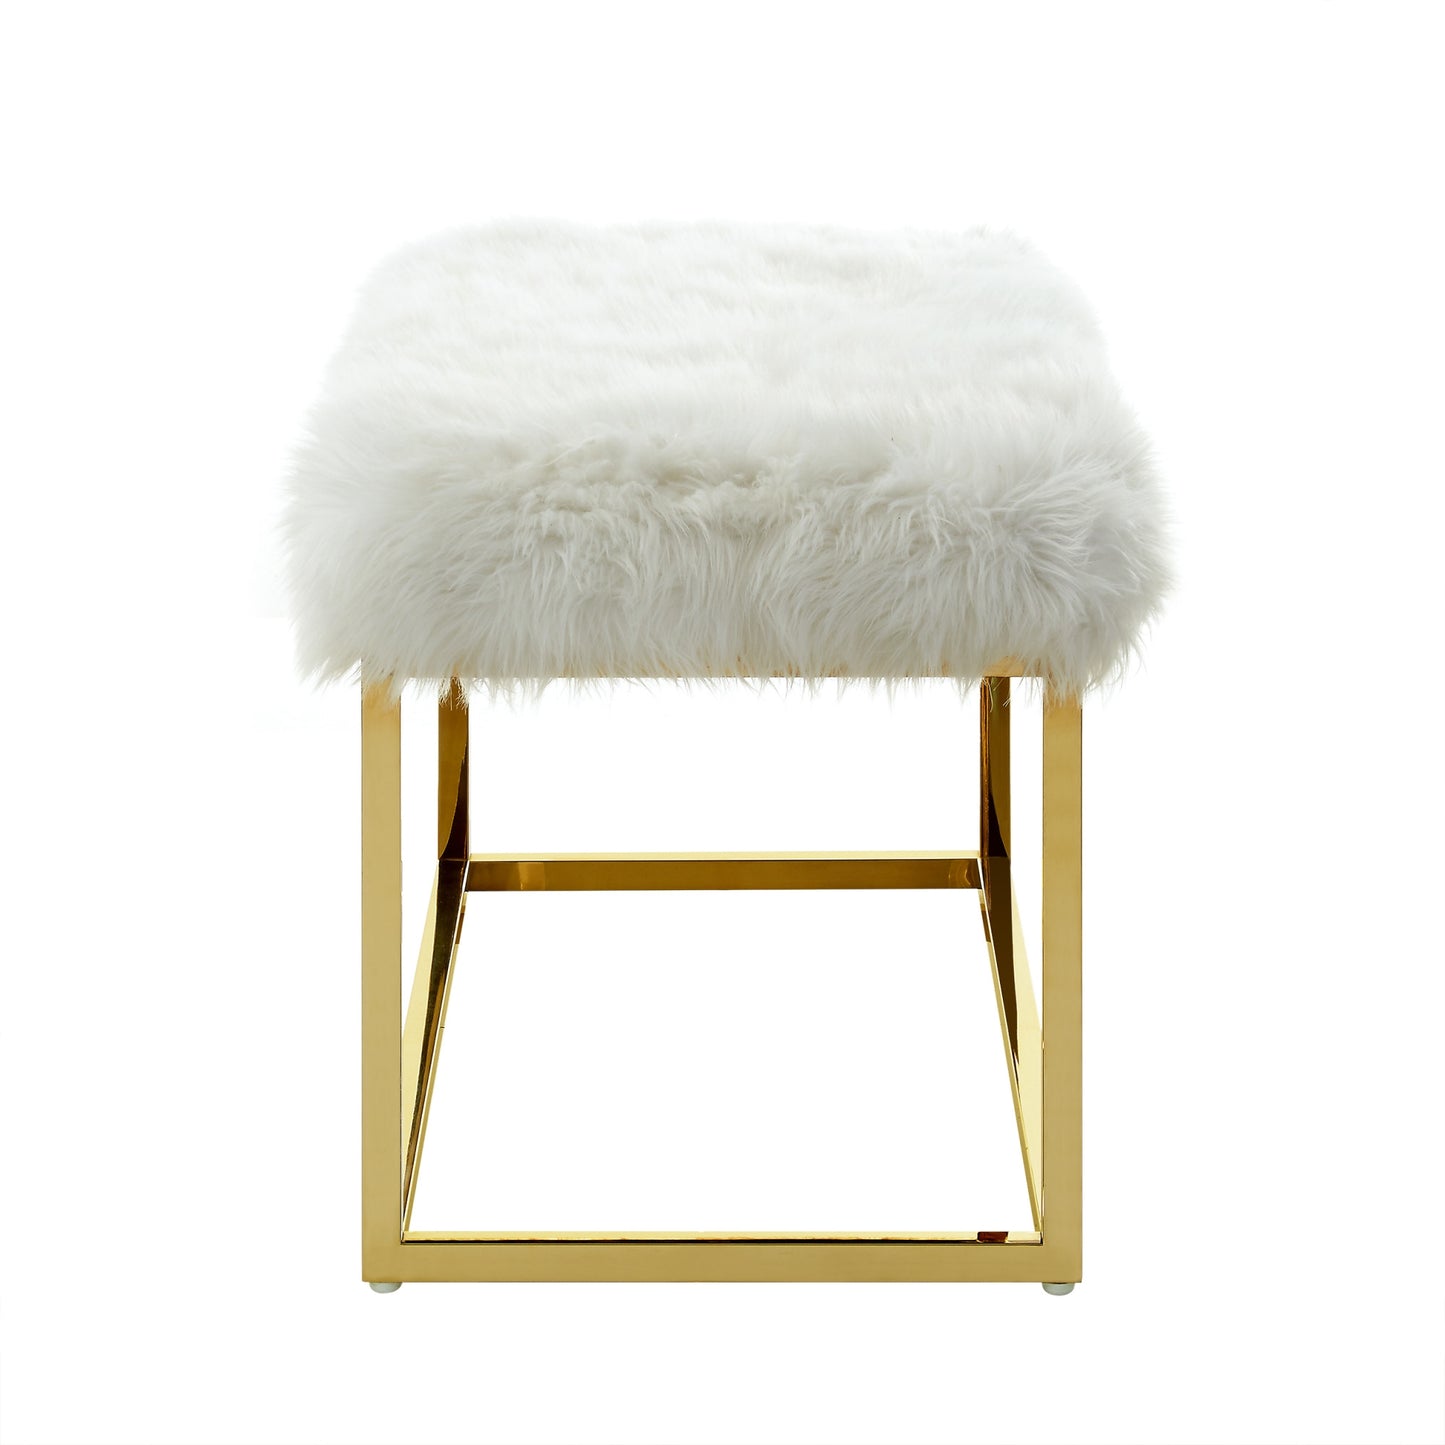 40" White And Gold Upholstered Faux Fur Bench By Homeroots